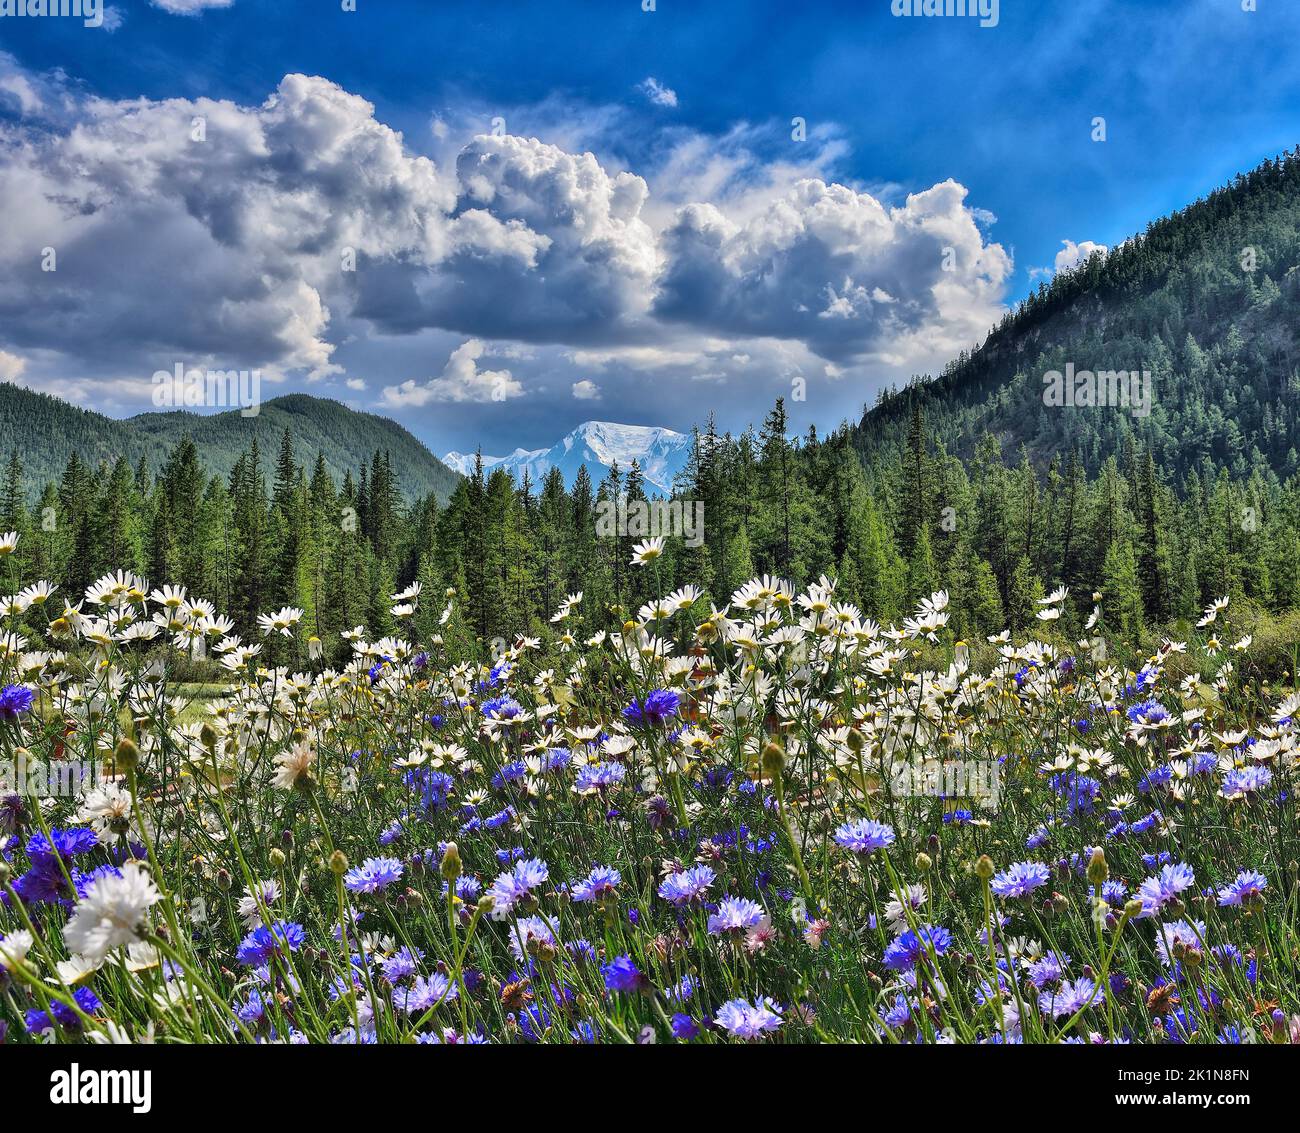 View to glacier on Belukha Mountain from blossoming mountain valley with white chamomiles and blue cornflowers, Altai mountains, Russia. Picturesque s Stock Photo